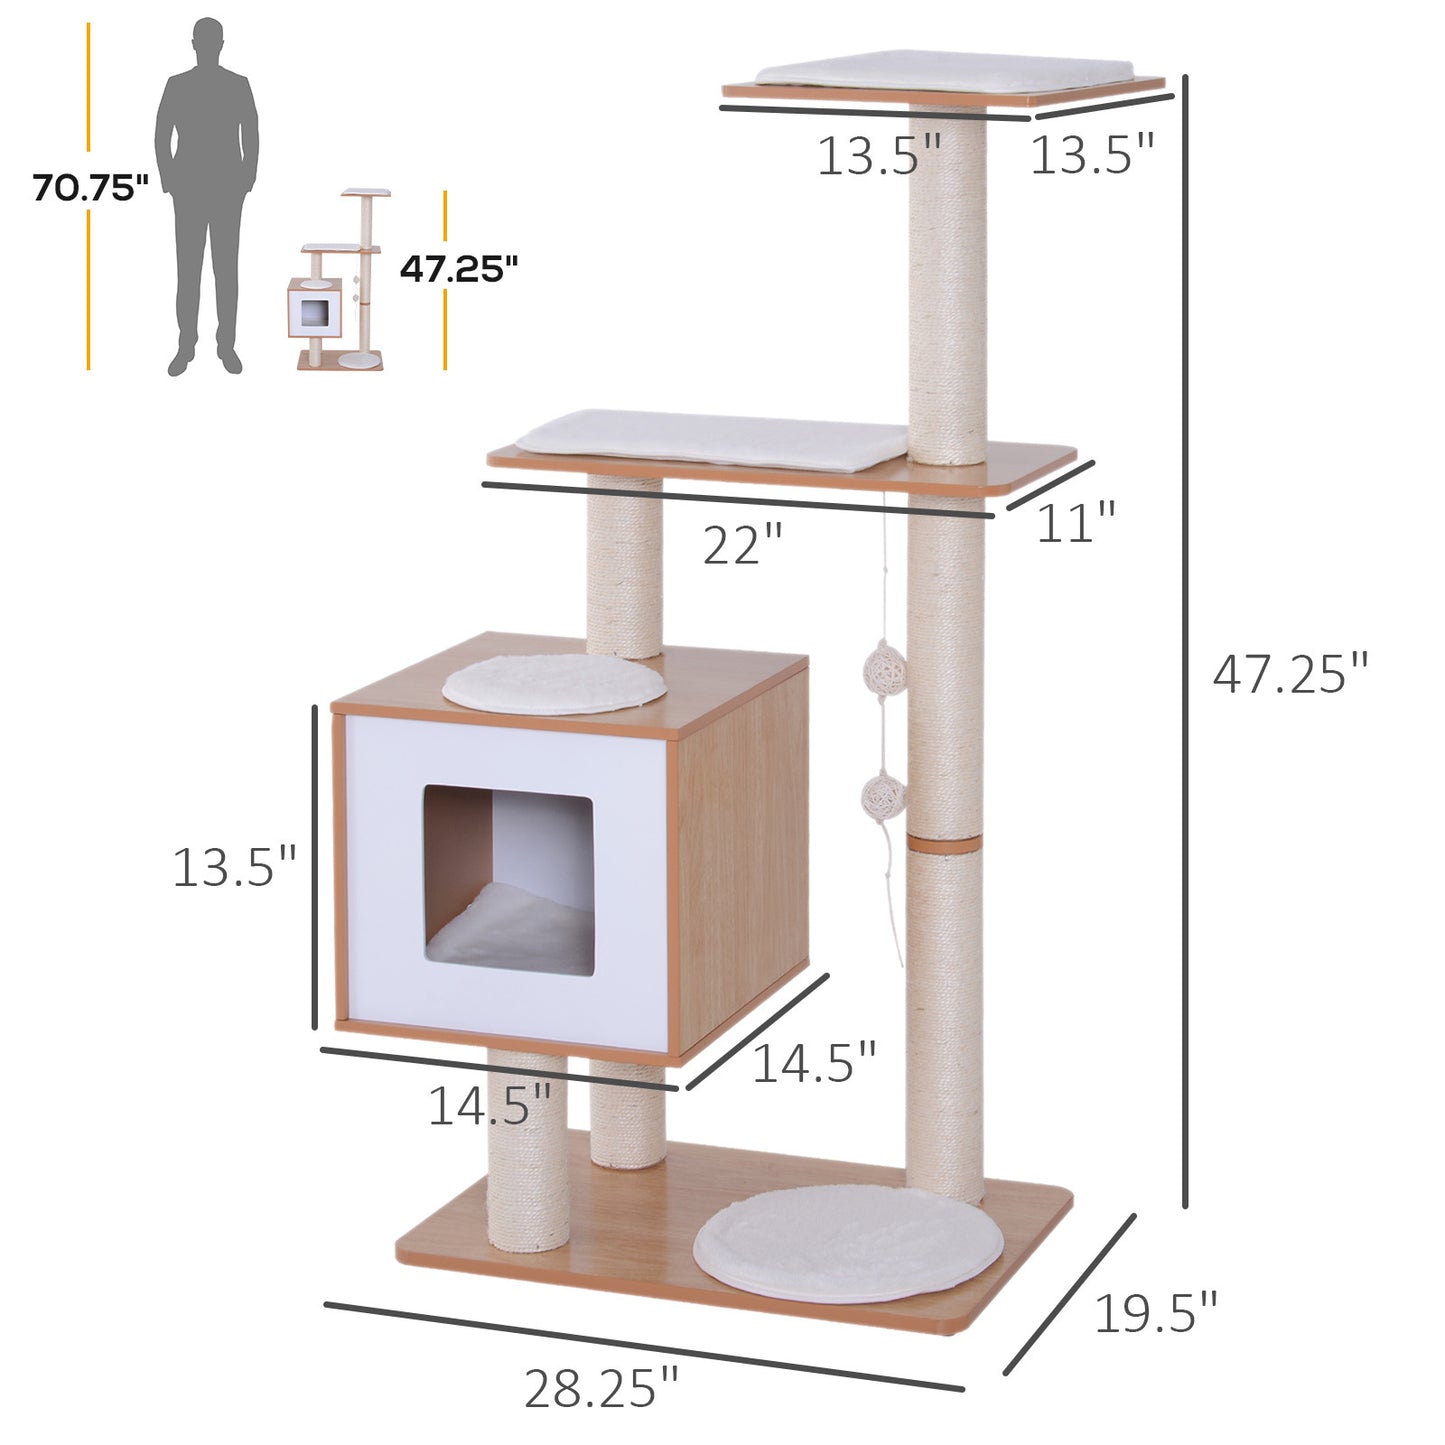 PawHut 47” Modern Cat Tree Multi-Level Scratching Post With Cube Cave Enclosure - Oak Wood and White